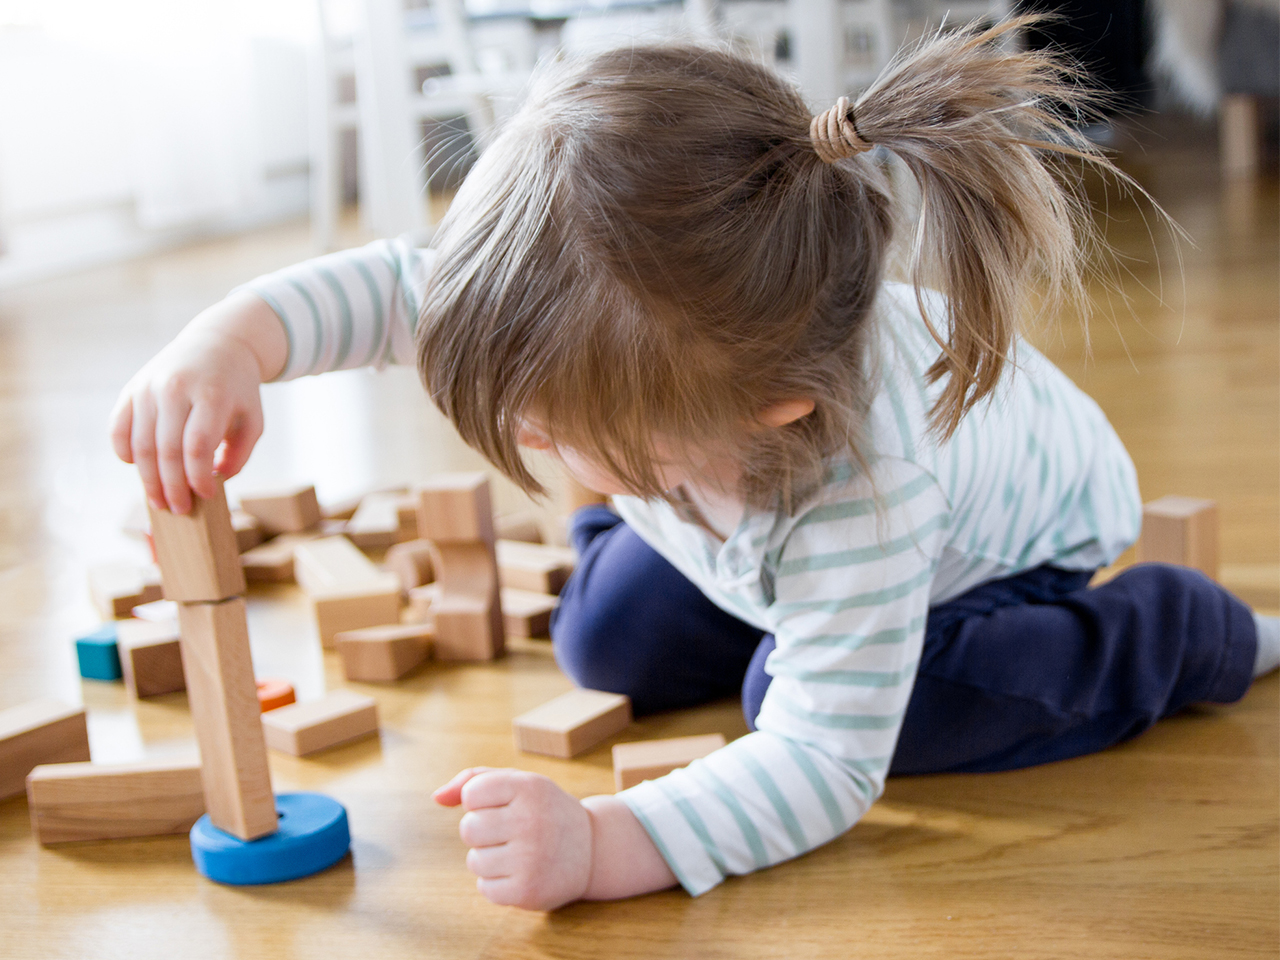 Why Choose Wooden Toys Instead Of Plastic Ones